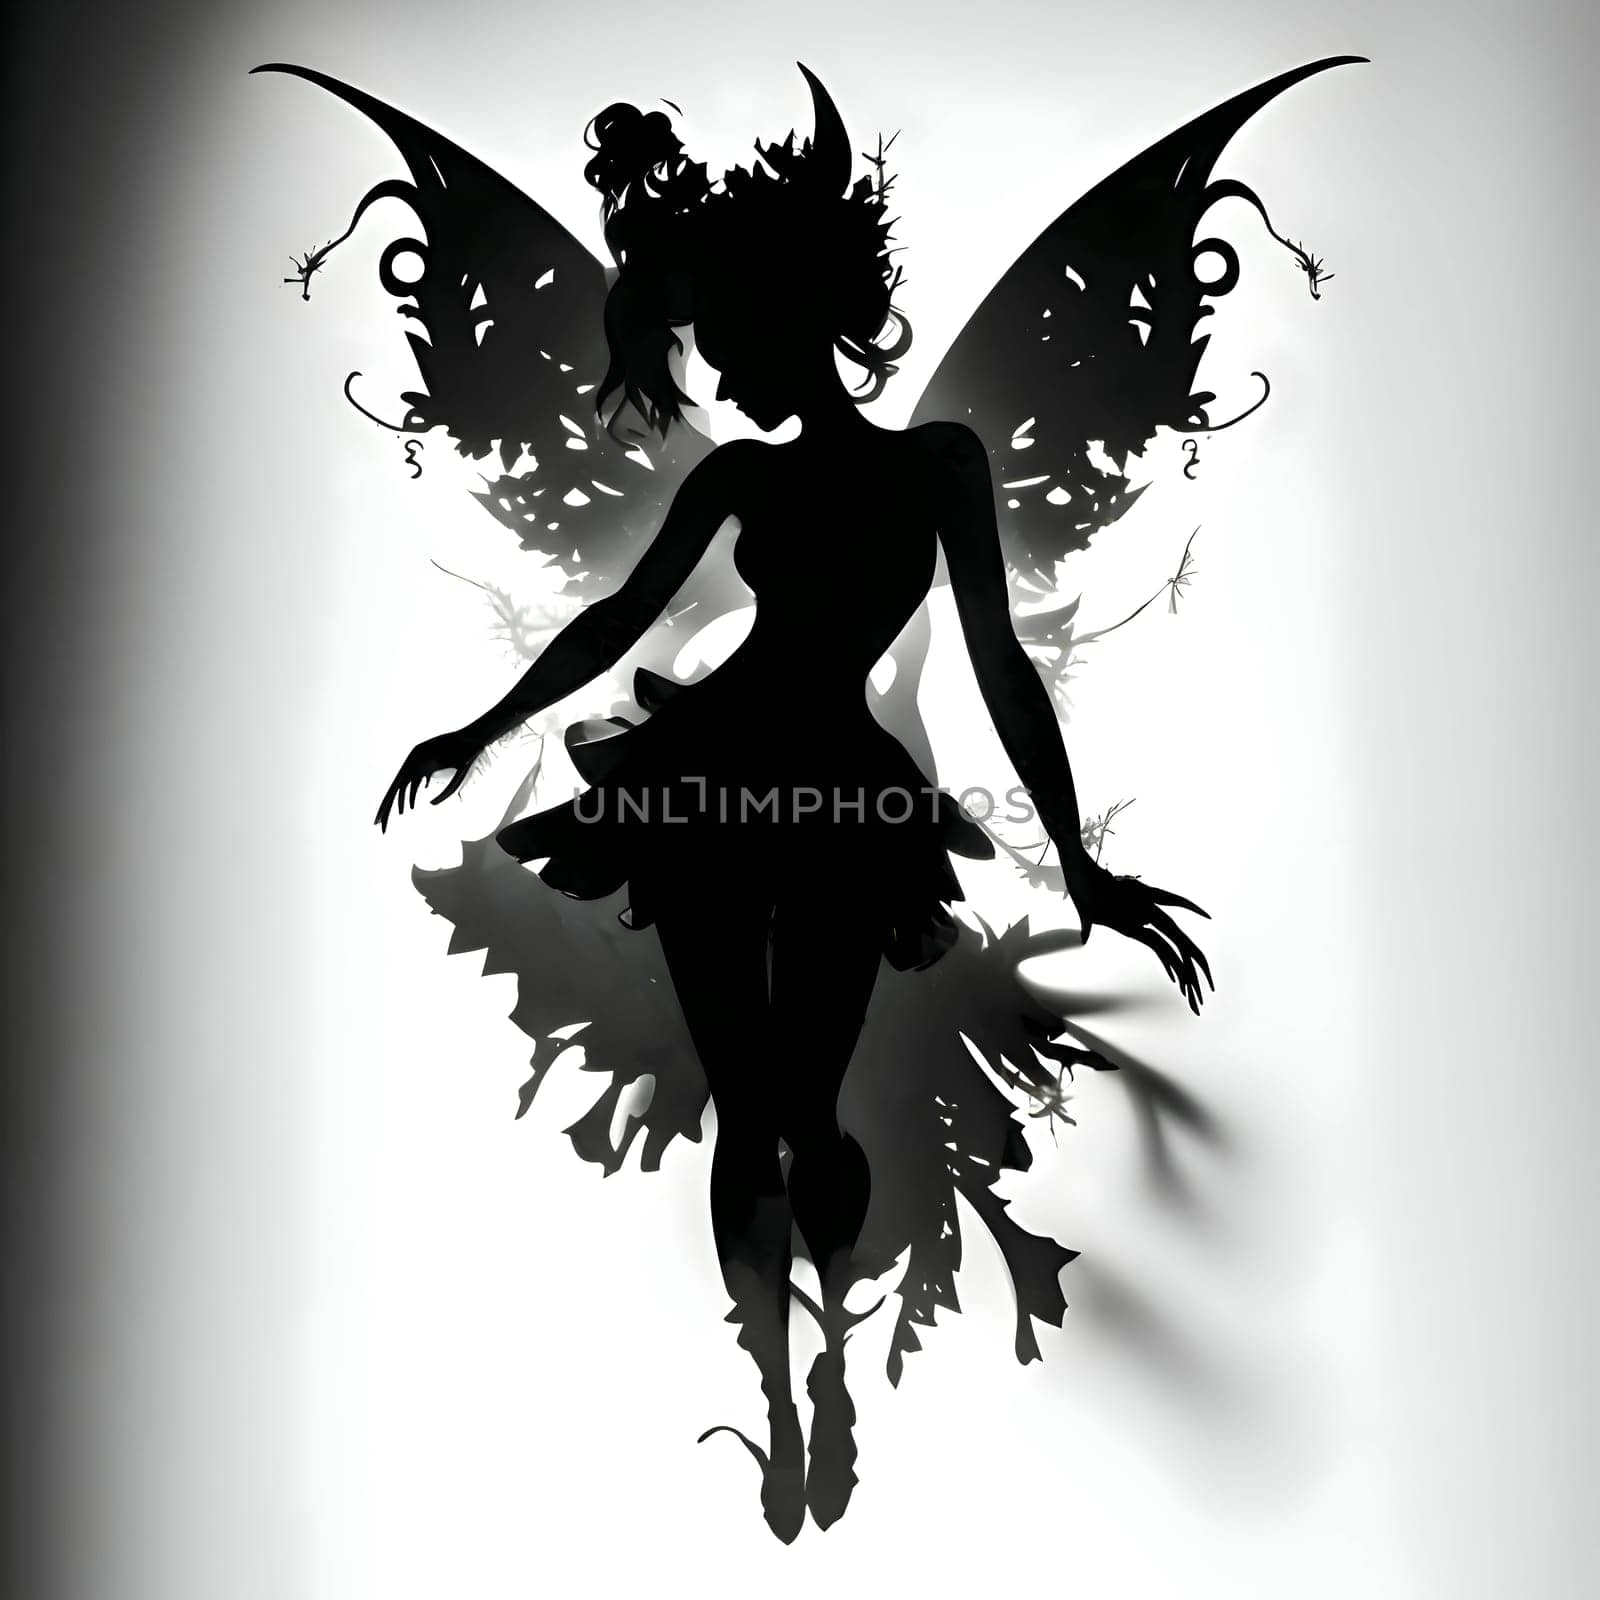 Vector illustration of a fairy in black silhouette against a clean white background, capturing graceful forms.